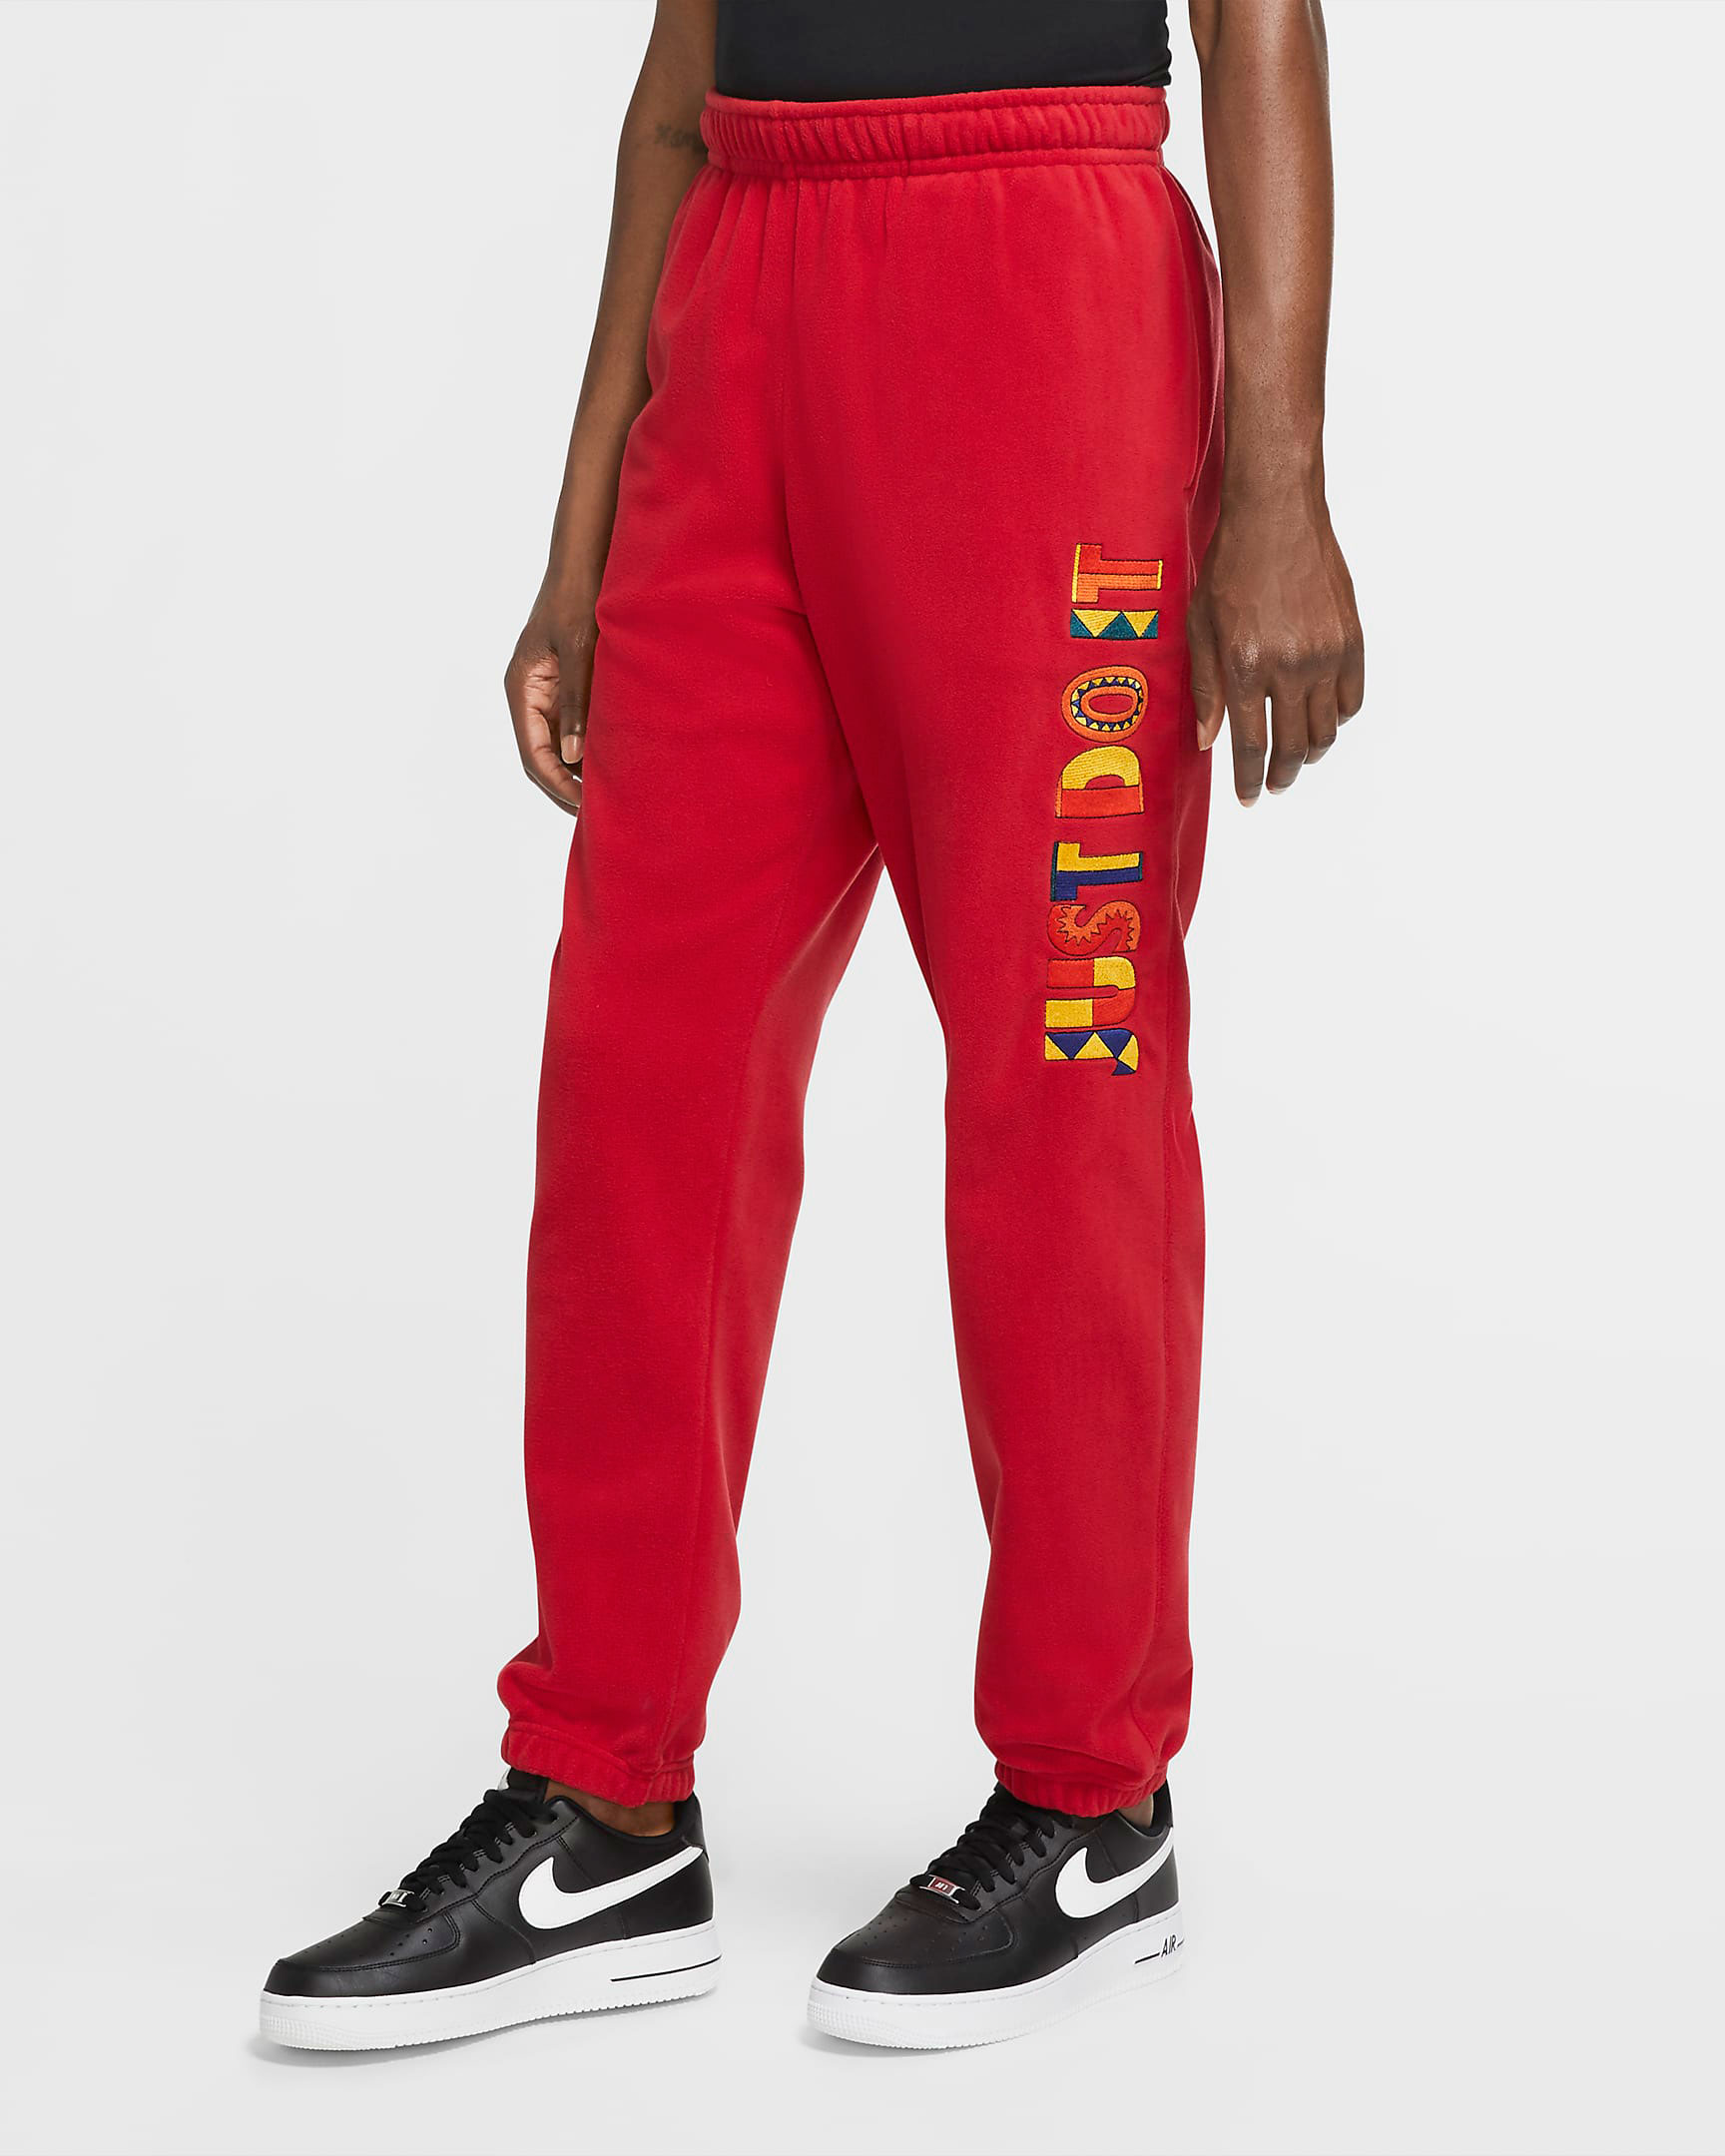 nike-urban-jungle-live-together-play-together-jogger-pants-red